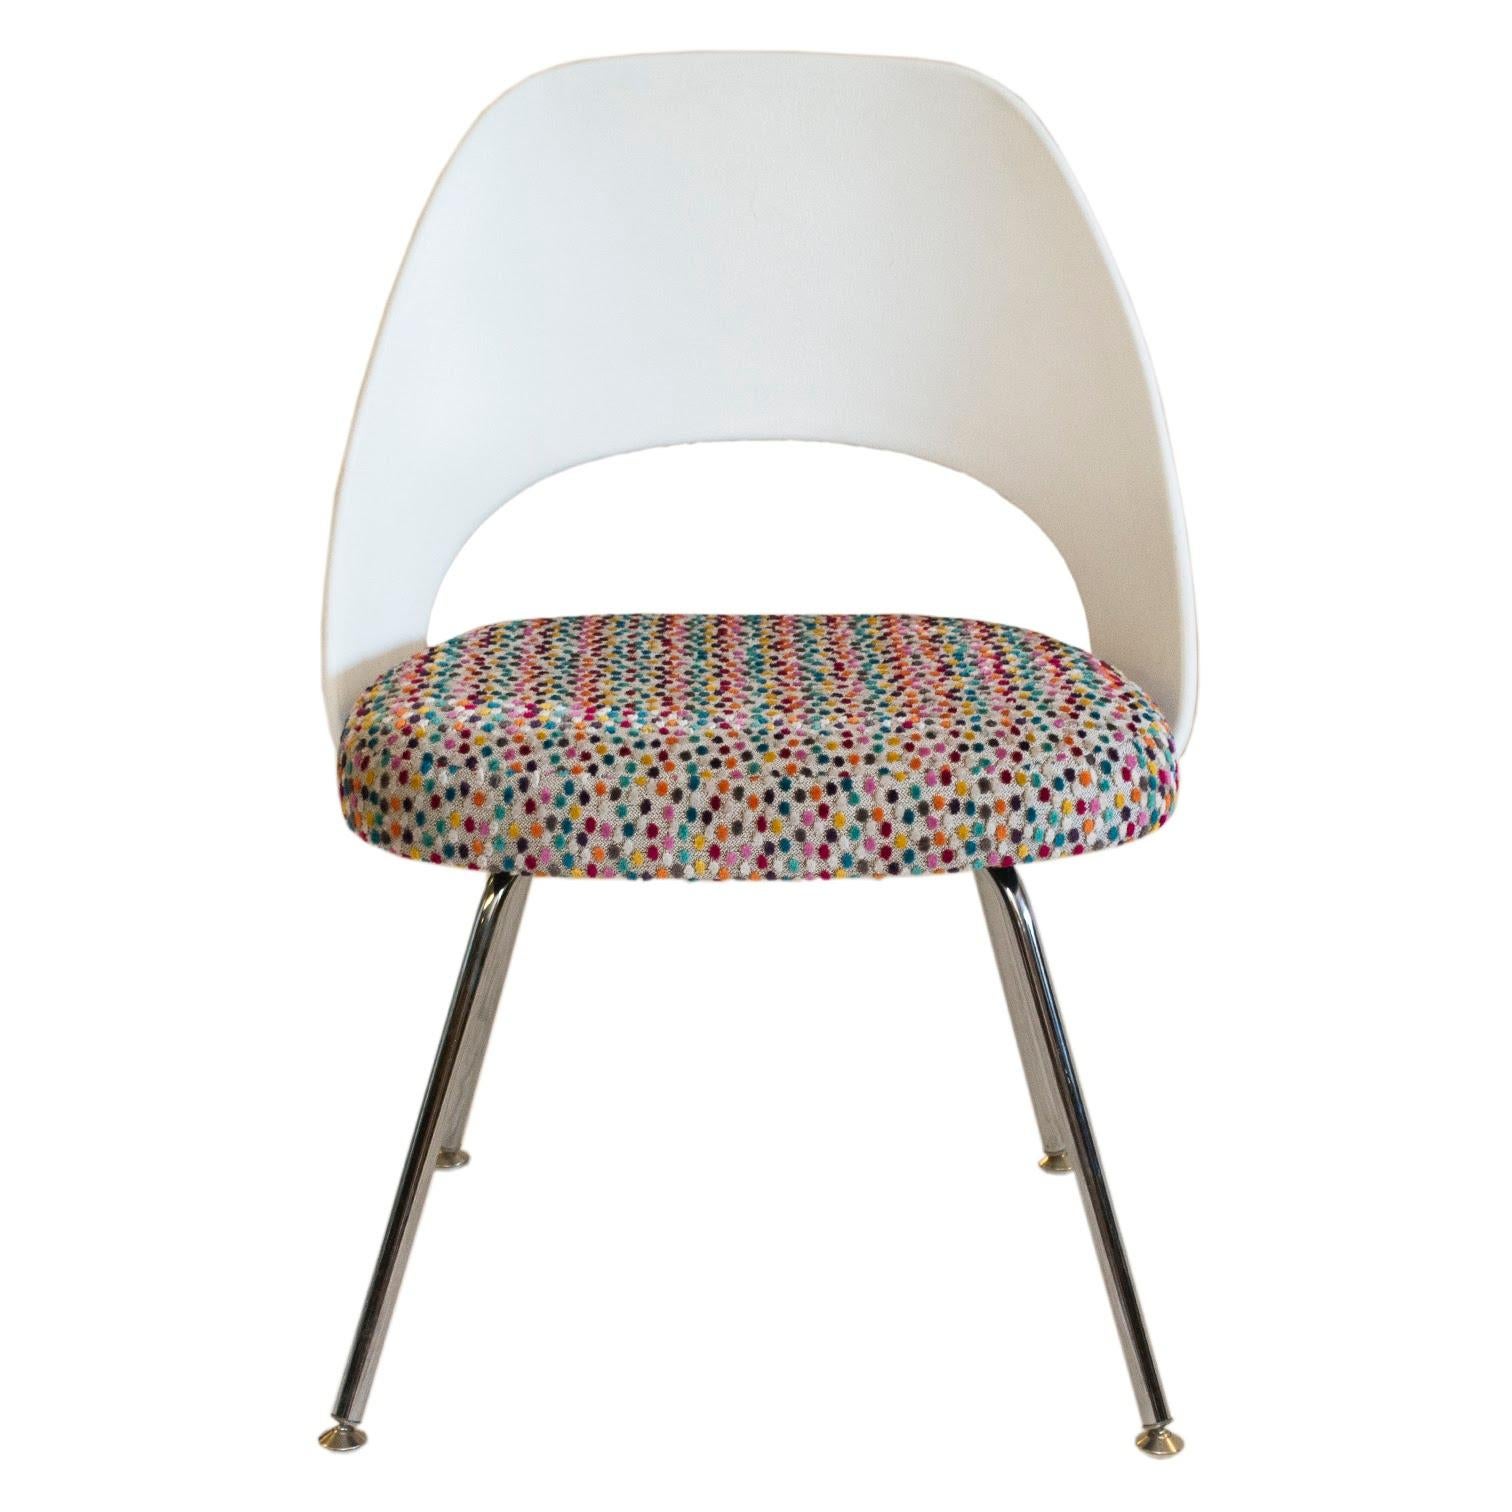 This Eero Saarinen for Knoll plastic-back side chair was reupholstered in a super fun mutli-color dot fabric. We offer this at a set - perfect for a fun kitchen - or as a single chair, great for a child’s room or fun desk chair. You can also mix and